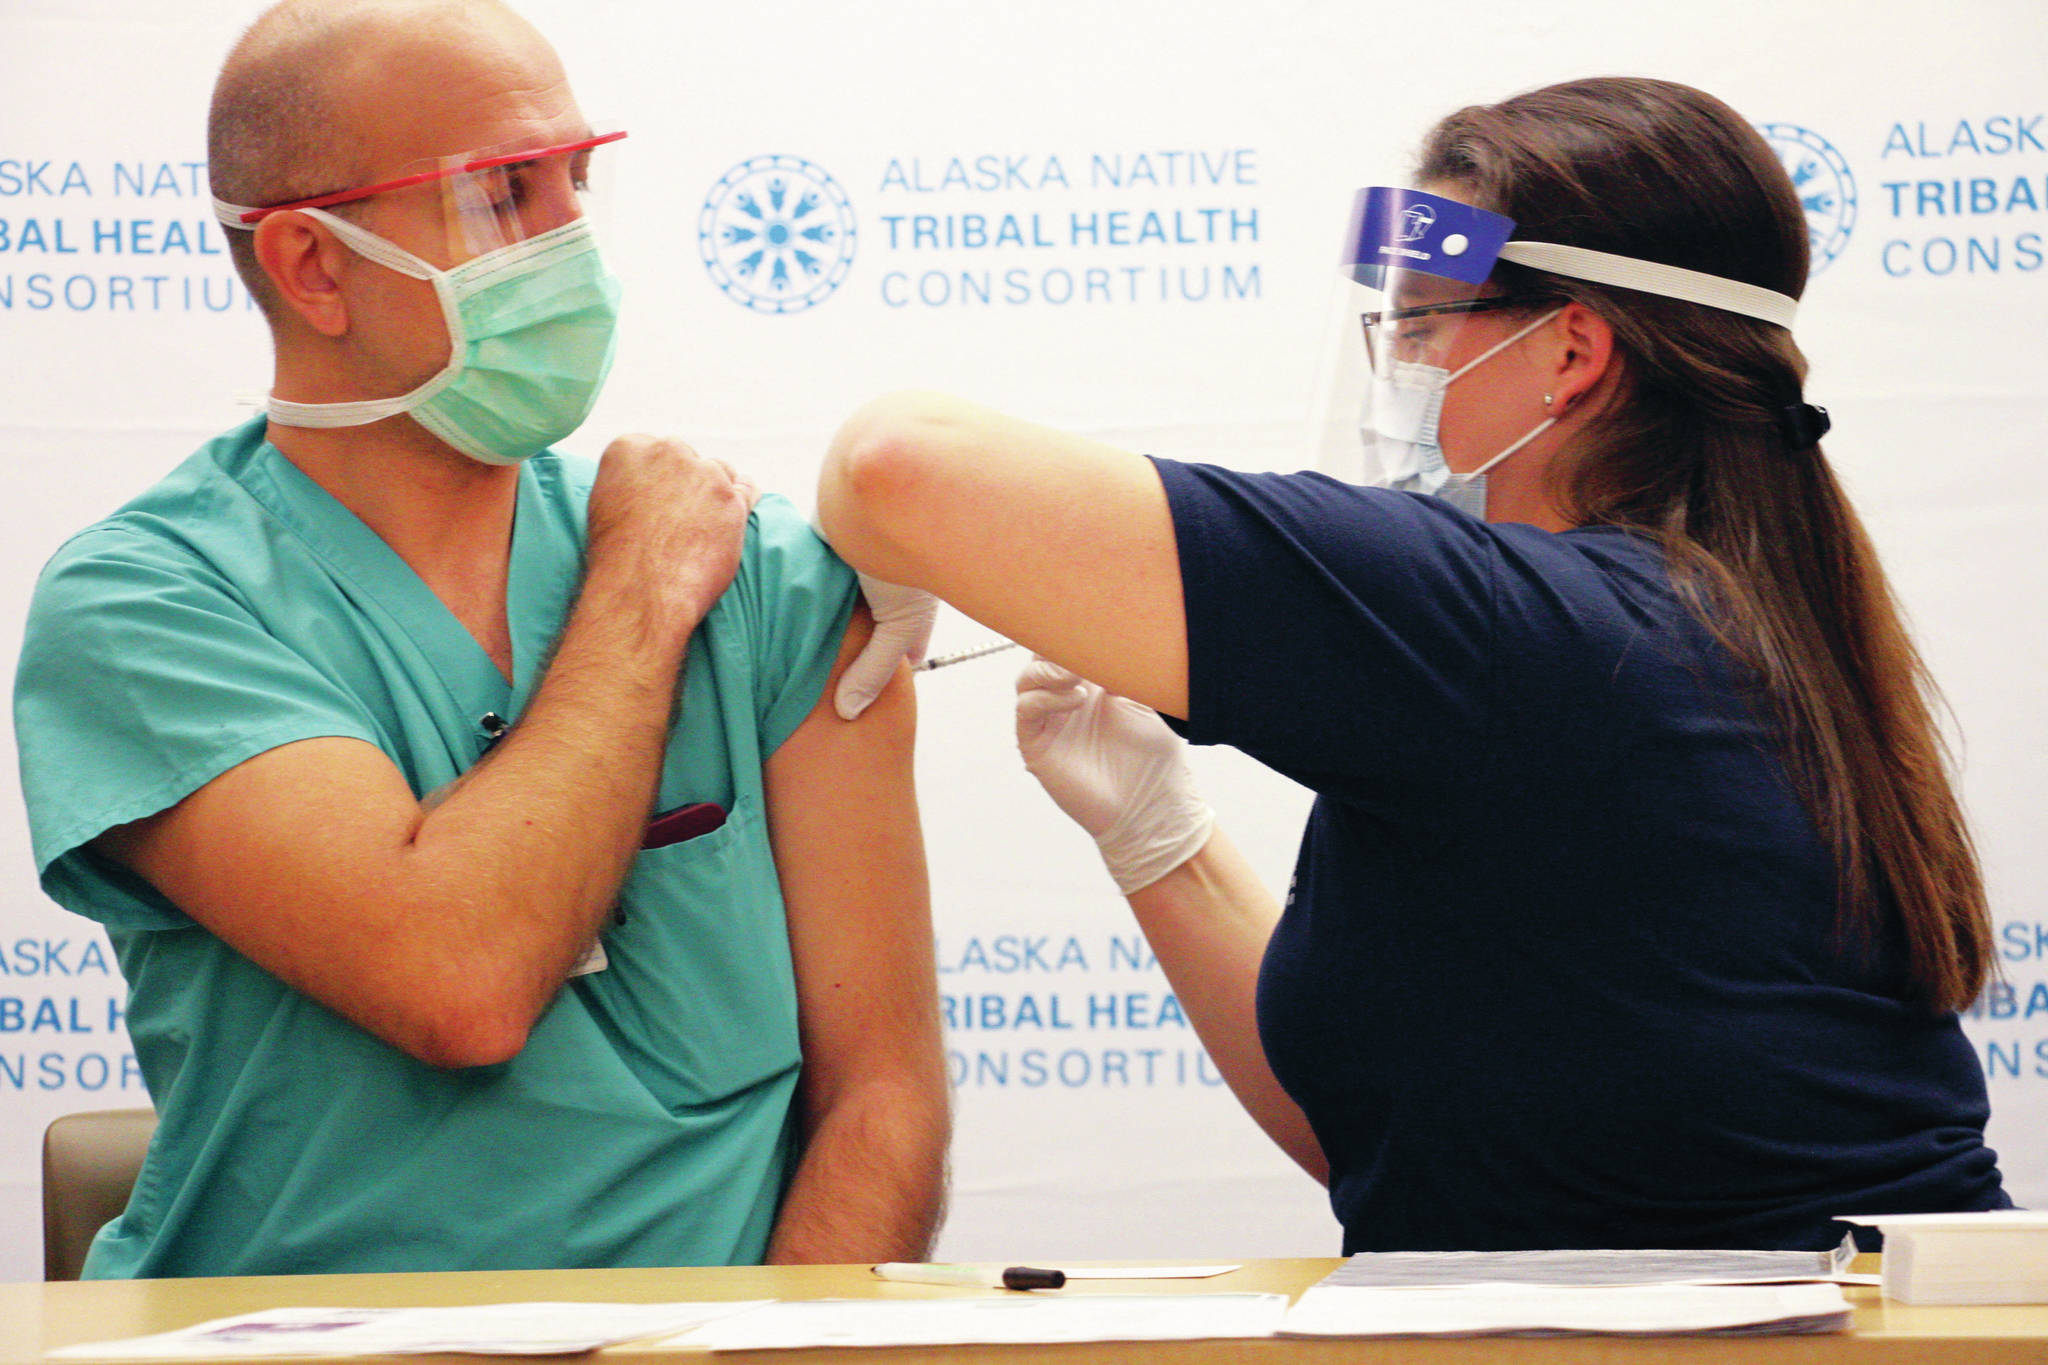 Dr. David Zielke, left, a pulmonary critical care physician, receives a dose of COVID-19 vaccine from Emily Schubert, the employee health nurse at the Alaska Native Medical Center in Anchorage, Alaska, on Tuesday, Dec. 15, 2020. Front-line health care workers are among the first in Alaska to receive the vaccine. (AP Photo/Mark Thiessen)